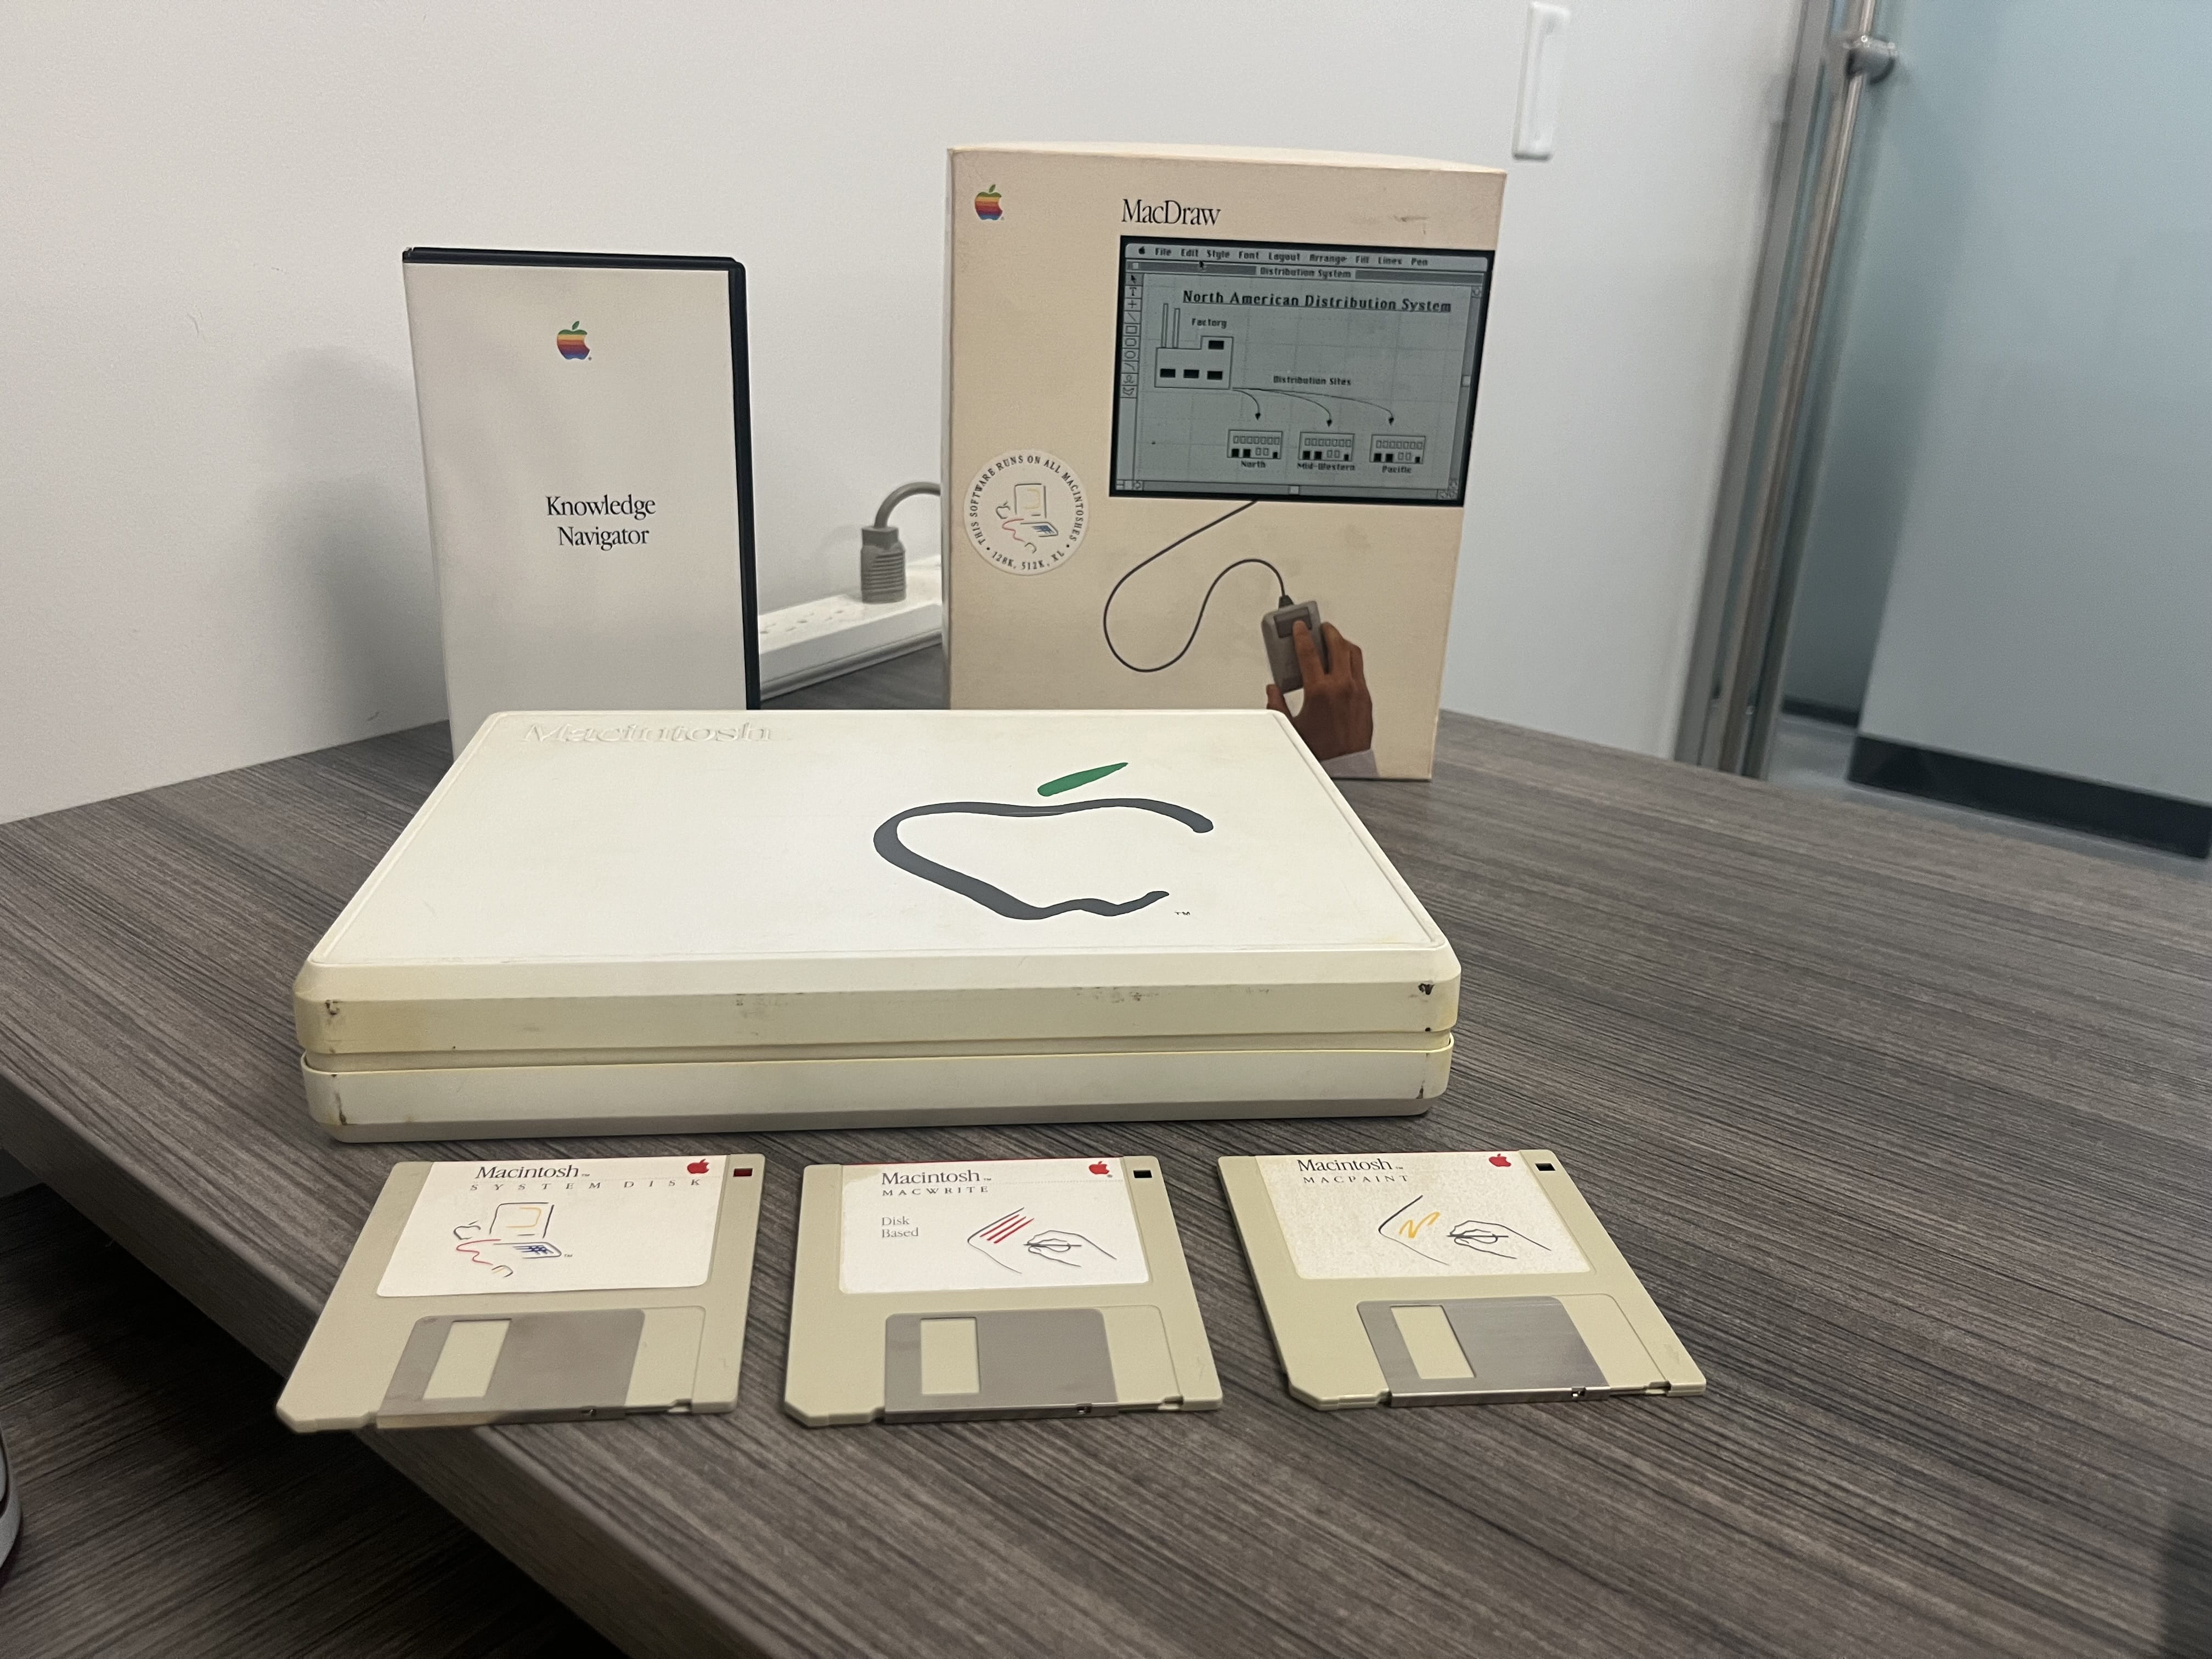 Some of the Macintosh components held in the Compuseum, including a MacDraw package, a “Knowledge Navigator” VHS tape, and recreated software disks for a Macintosh systems disk, MacWrite and MacPaint.